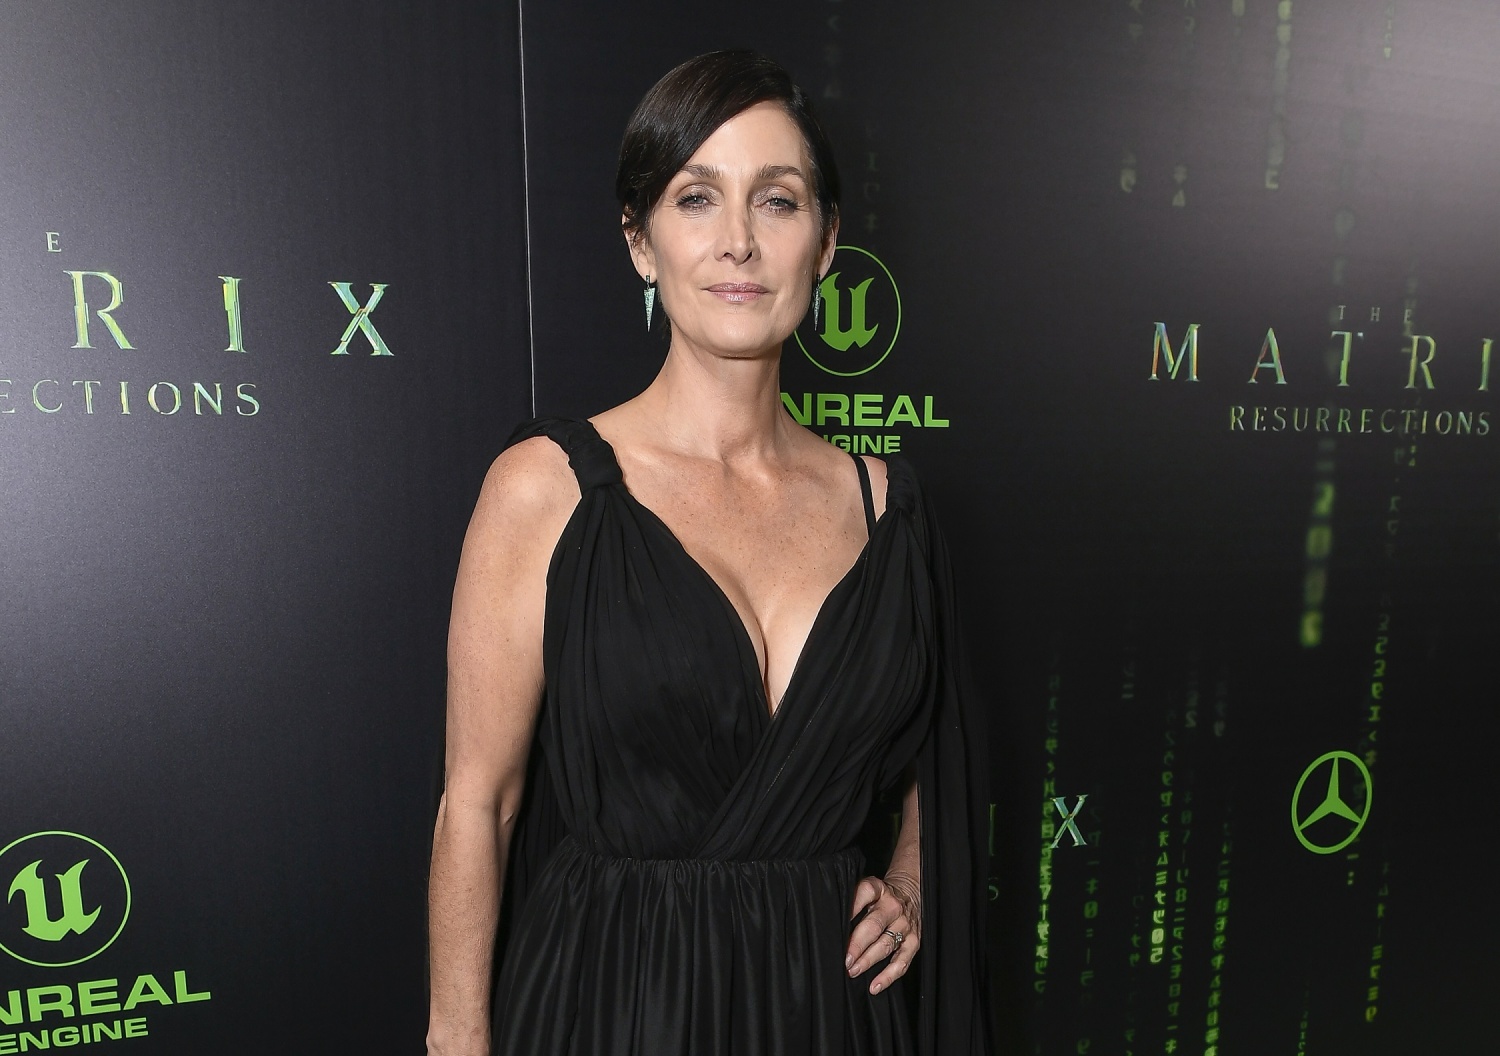  Actress Carrie-Anne Moss attends "The Matrix Resurrections" Red Carpet U.S. Premiere Screening at The Castro Theatre on December 18, 2021 in San Francisco, California.